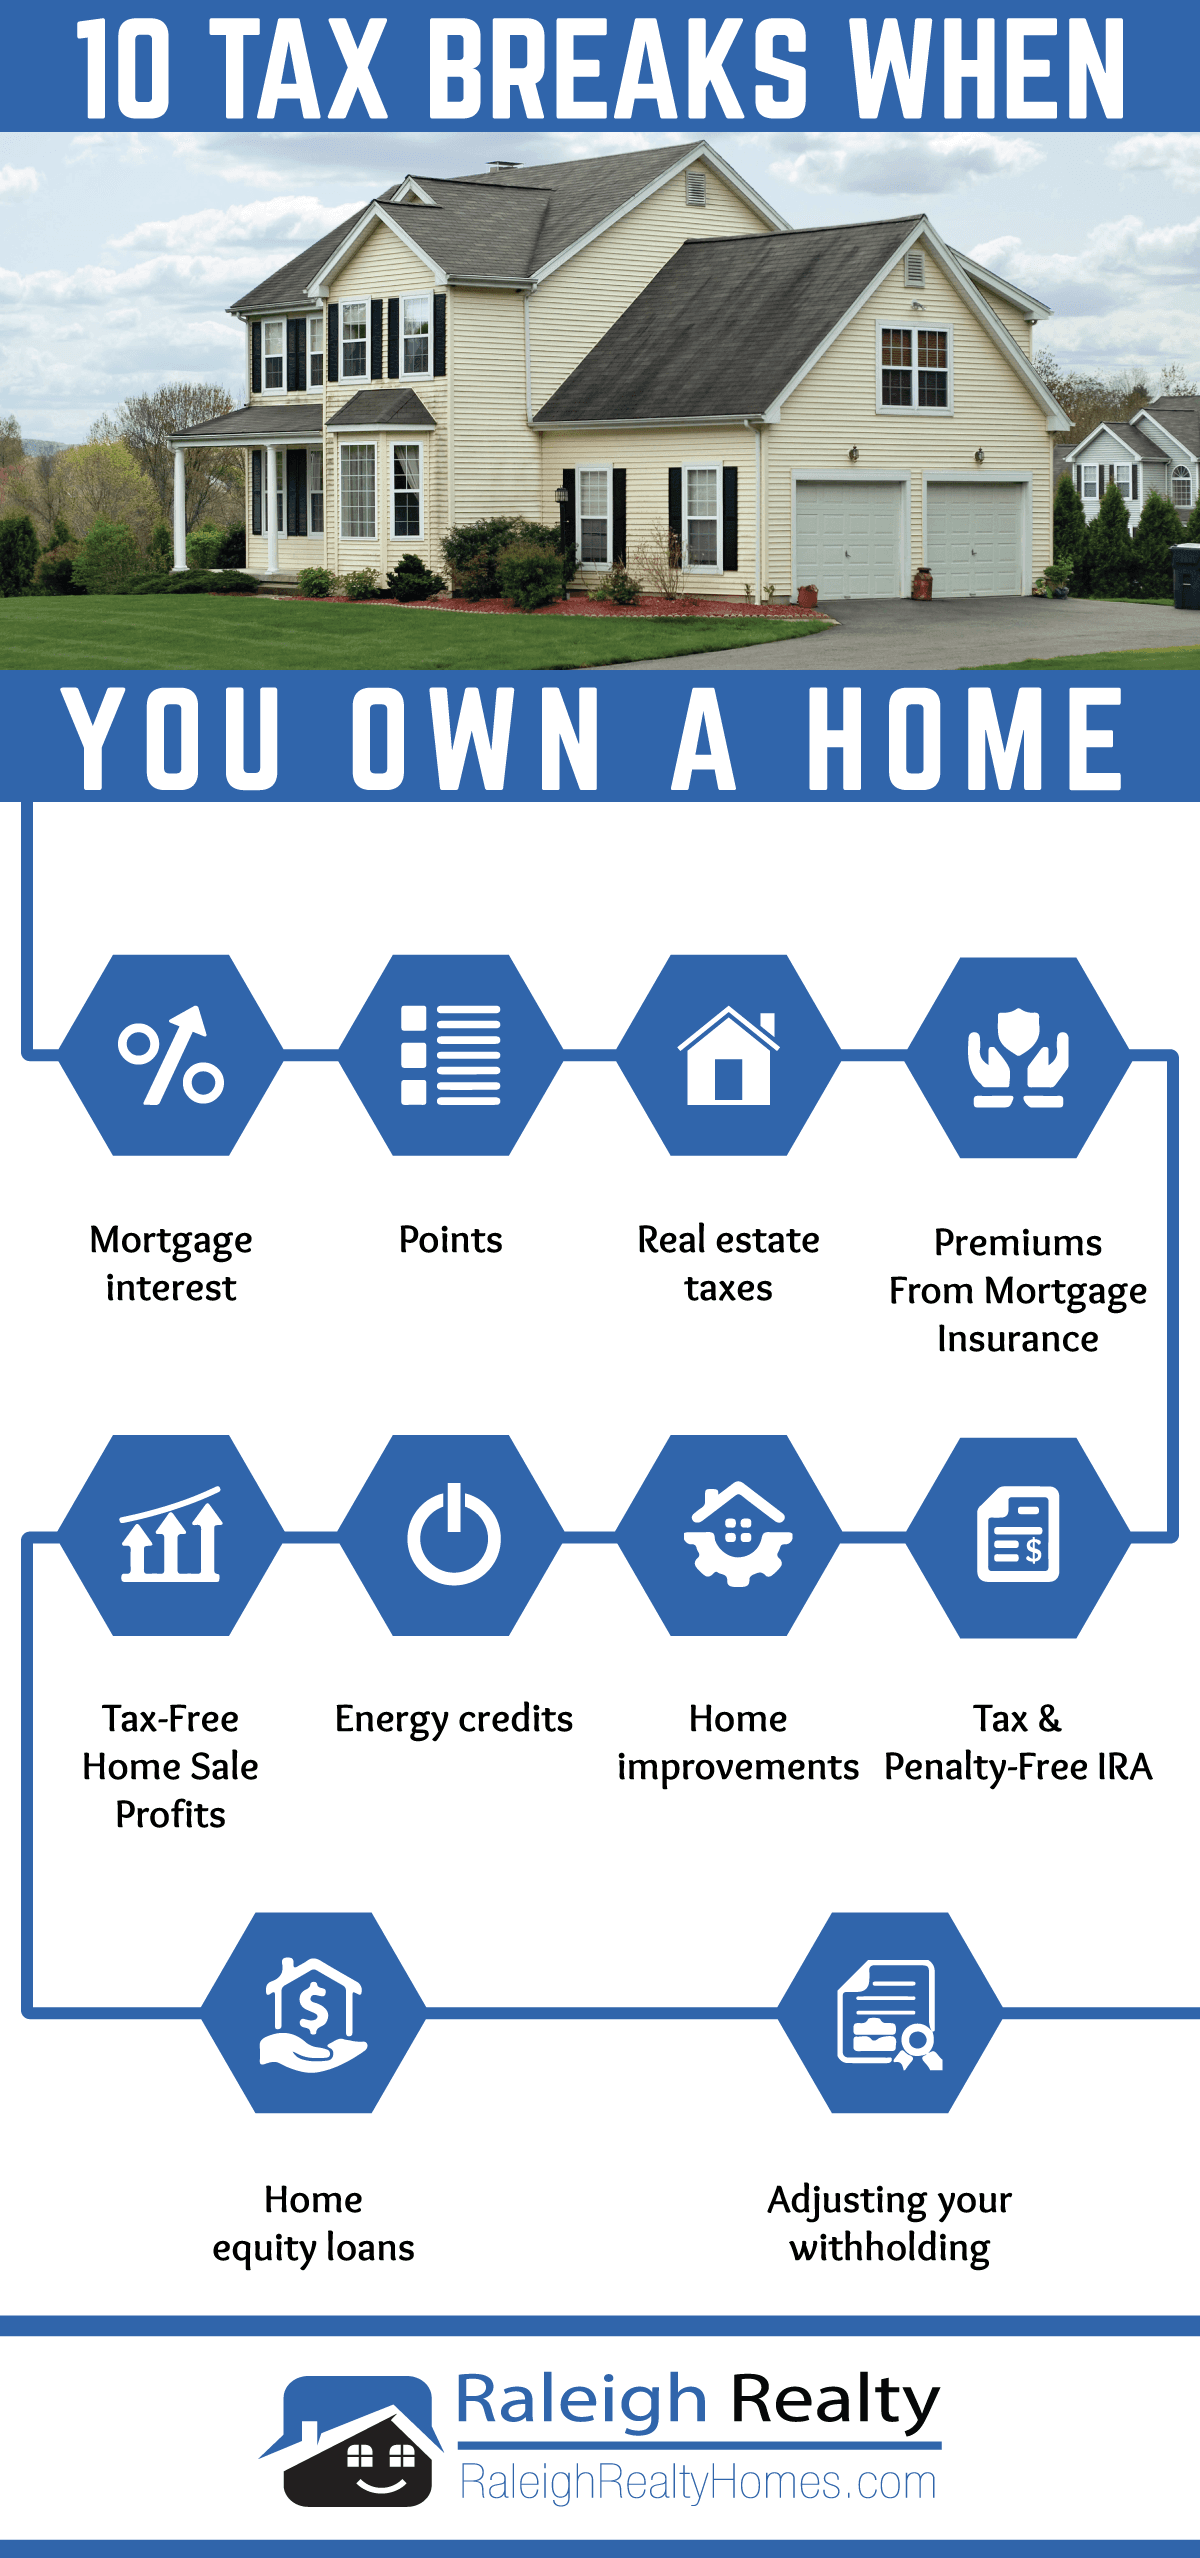 10 AWESOME Tax Breaks When You Own a Home {Infographic}